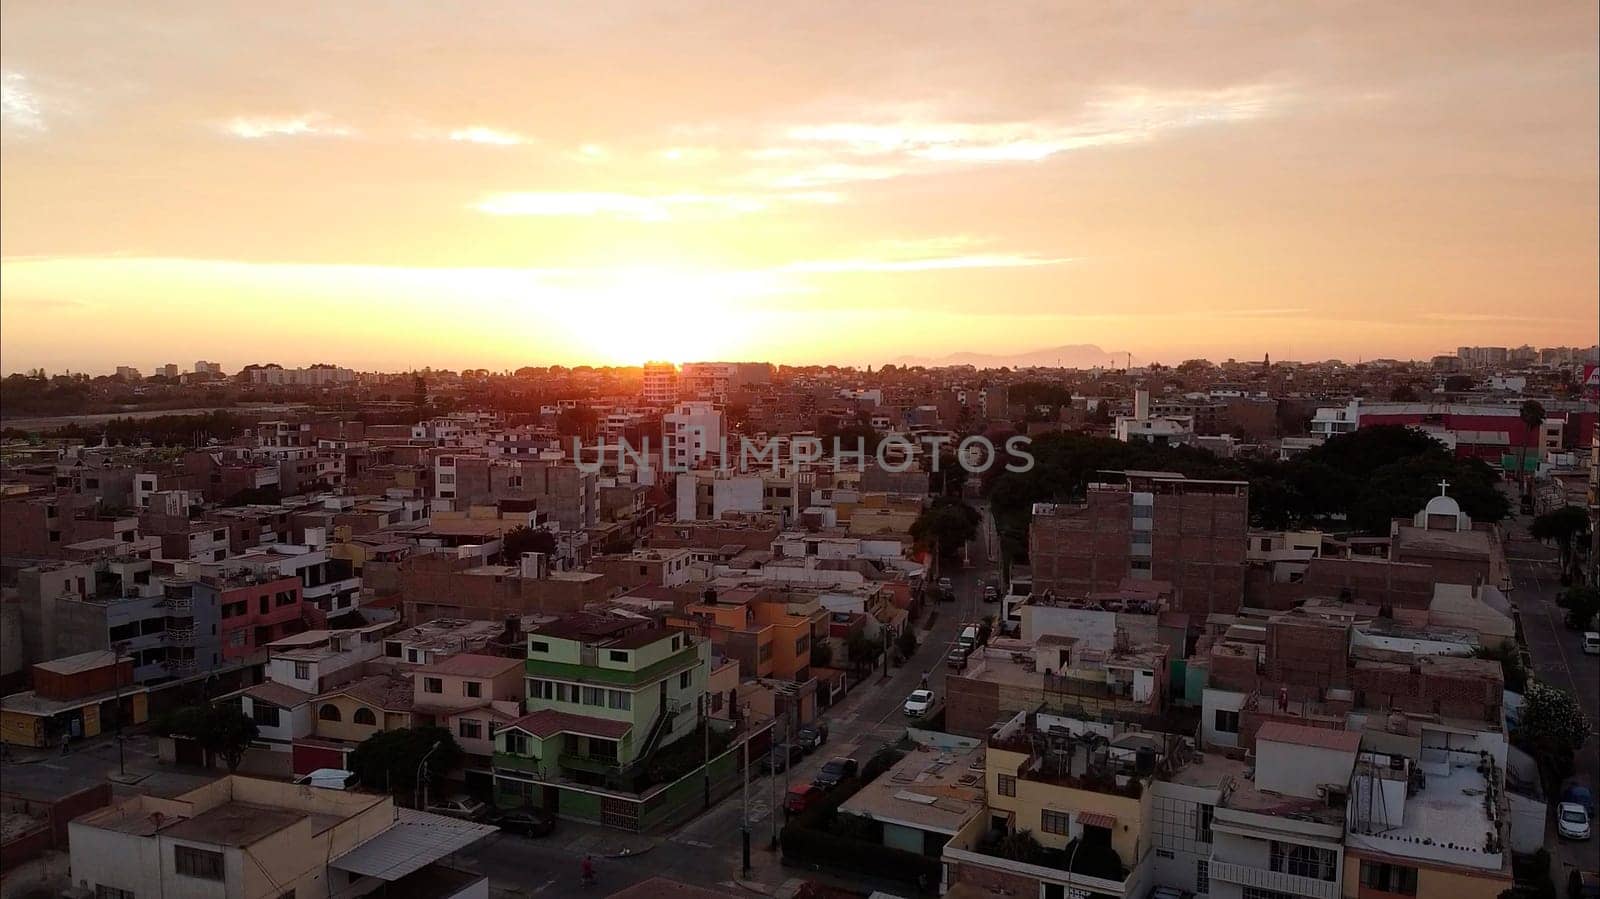 Aerial view of a cityscape bathed in the warm hues of a tranquil sunset